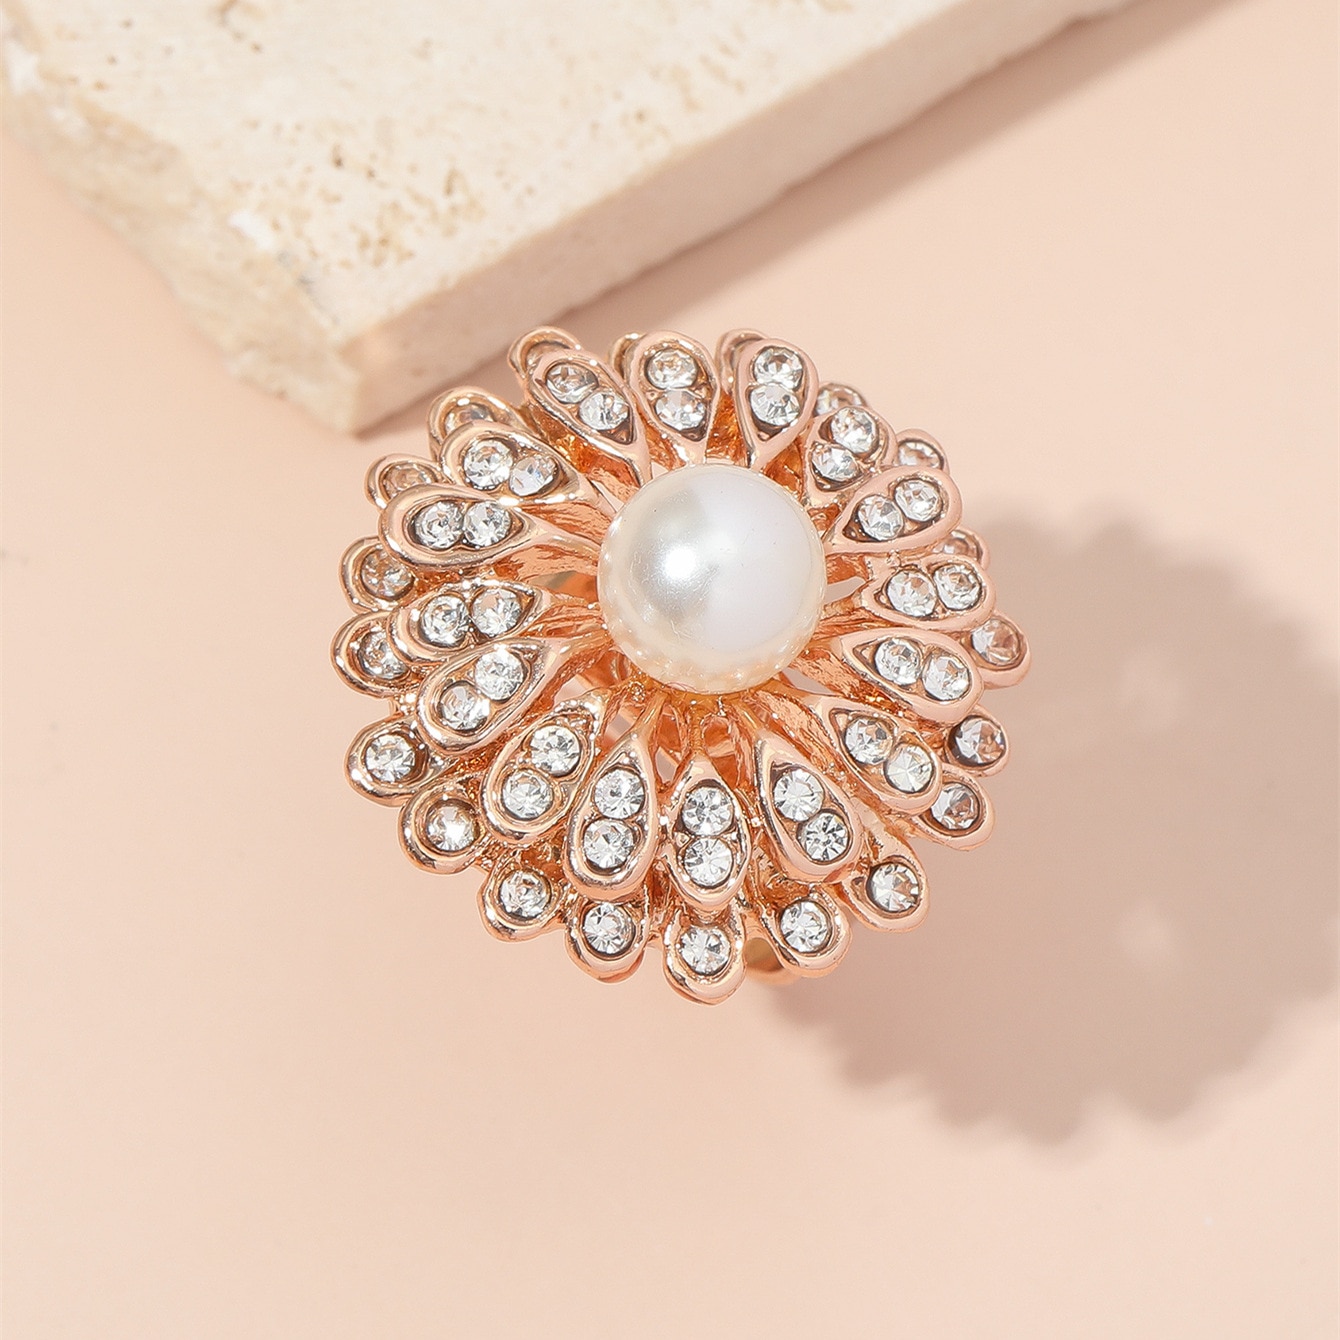 New-Retro-Small-Flower-CZ-Rings-Indian-Jewelry-Retro-Cute-Pearl-Finger-Ring-Banquet-Jewelry-Female-G-1005004336840341-4